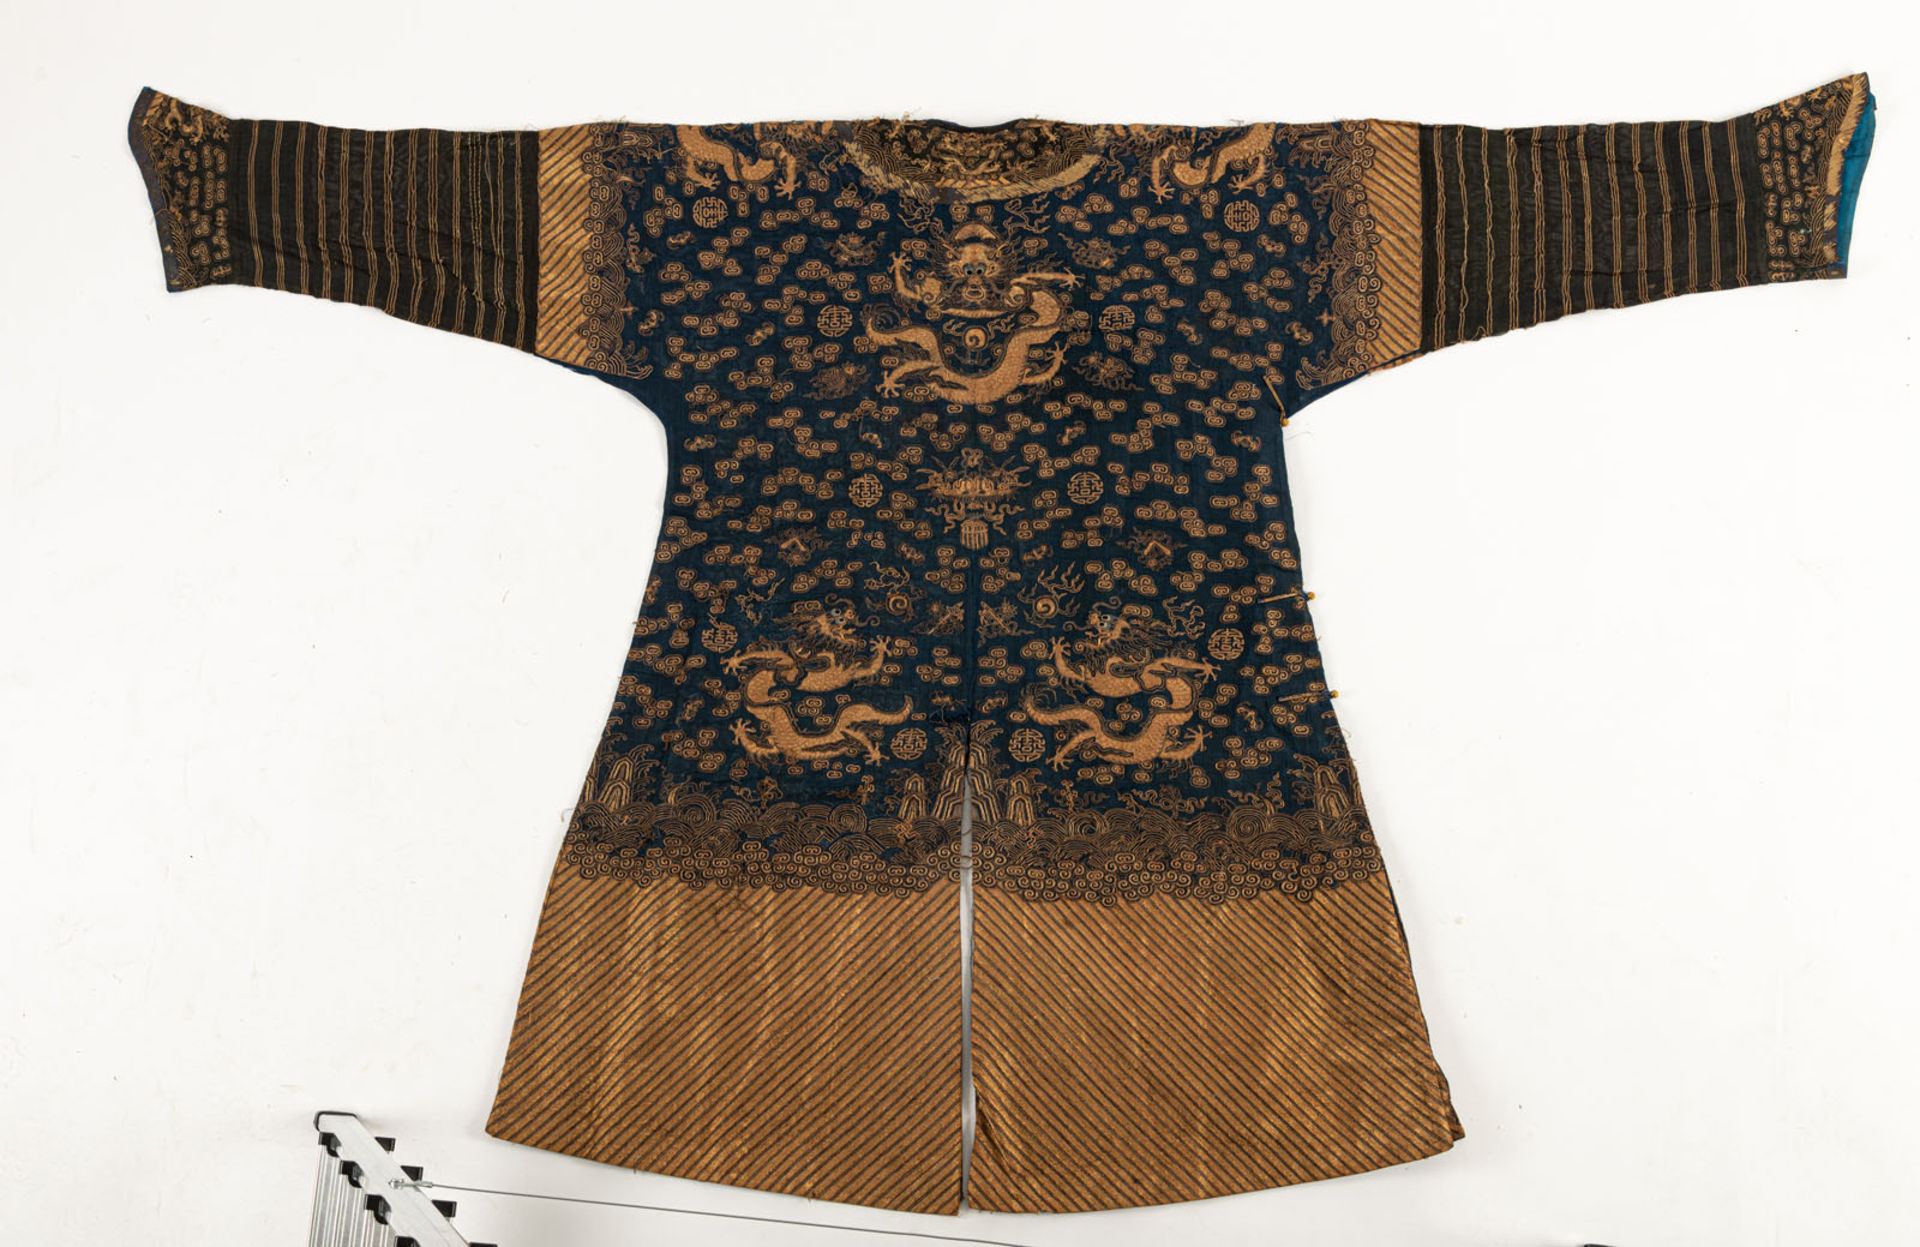 NAVY BLUE DRAGON ROBE (JIFU) IN SHA AND GOLD EMBROIDERY FOR A GENTLEMAN - Image 8 of 8